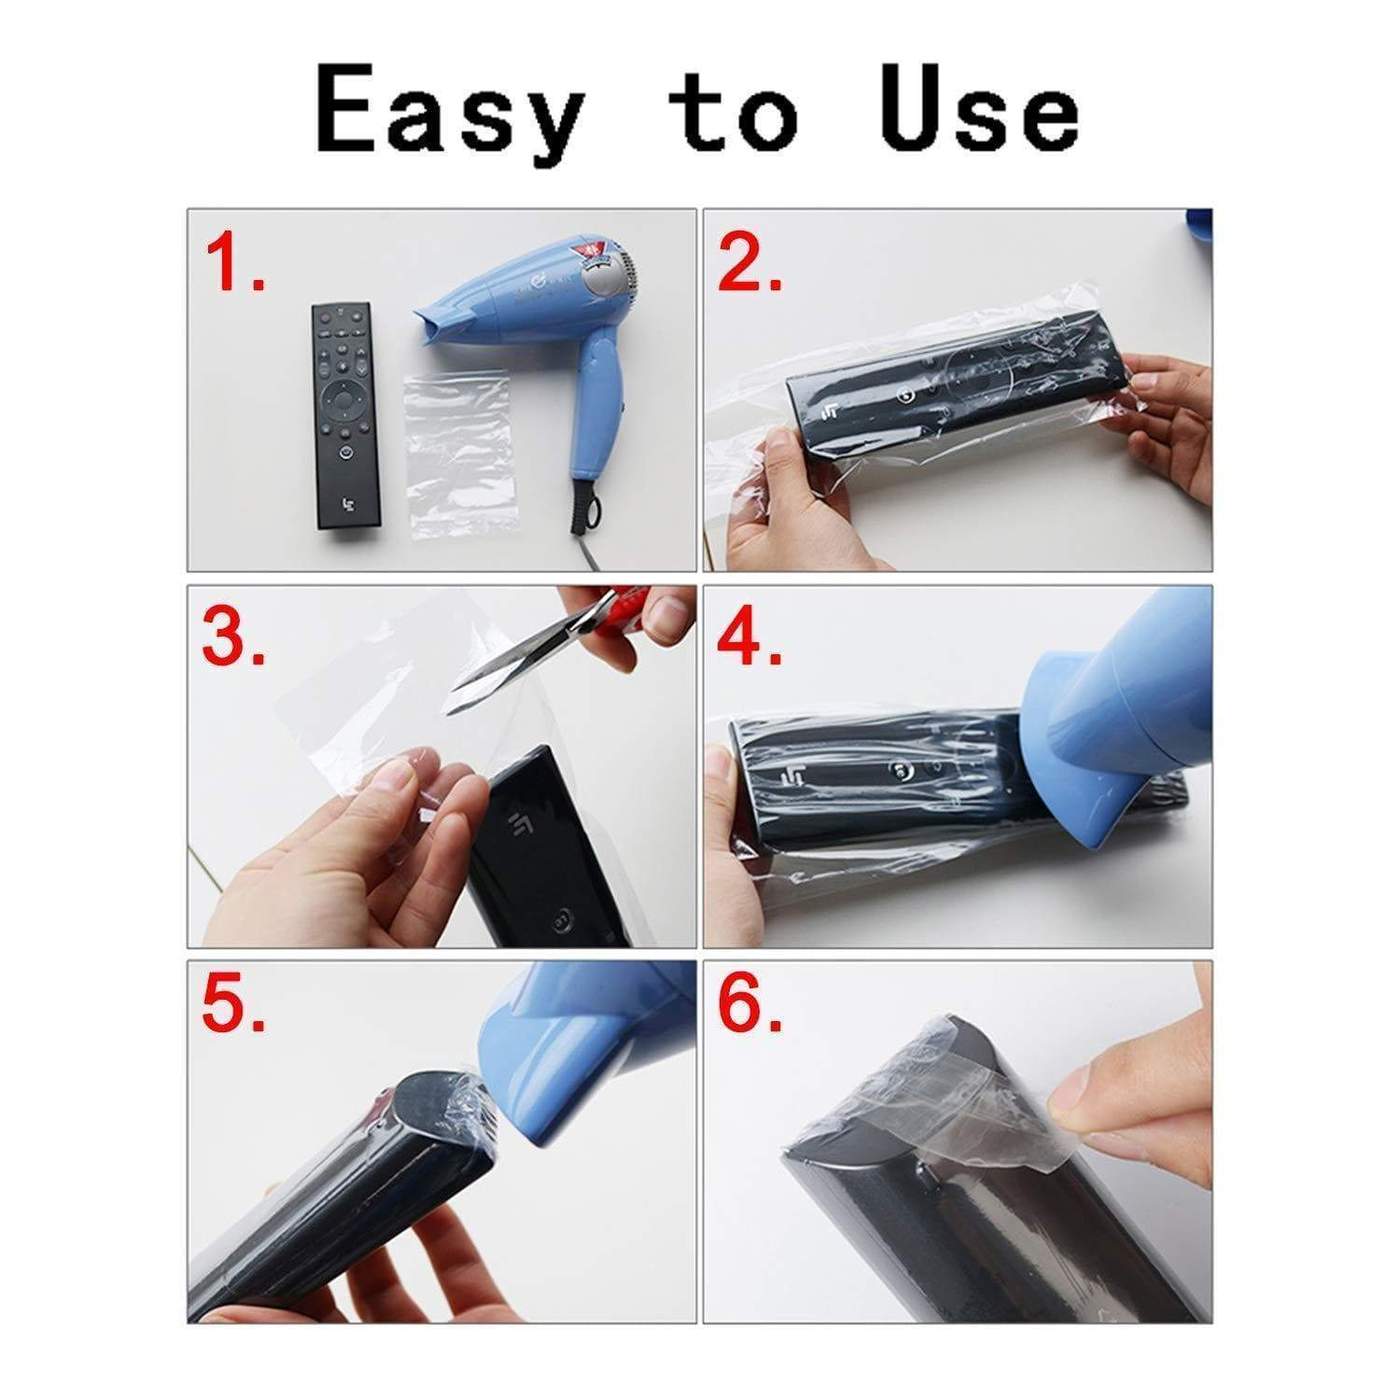 5Pcs-Heat-Shrink-Film-TV-Air-Conditioner-Video-Remote-Control-Protector-Cover-for-Face-Sheet-Against_10_e5bba61e-9b65-4028-a047-3ebb182c0ea6_1400x.jpg